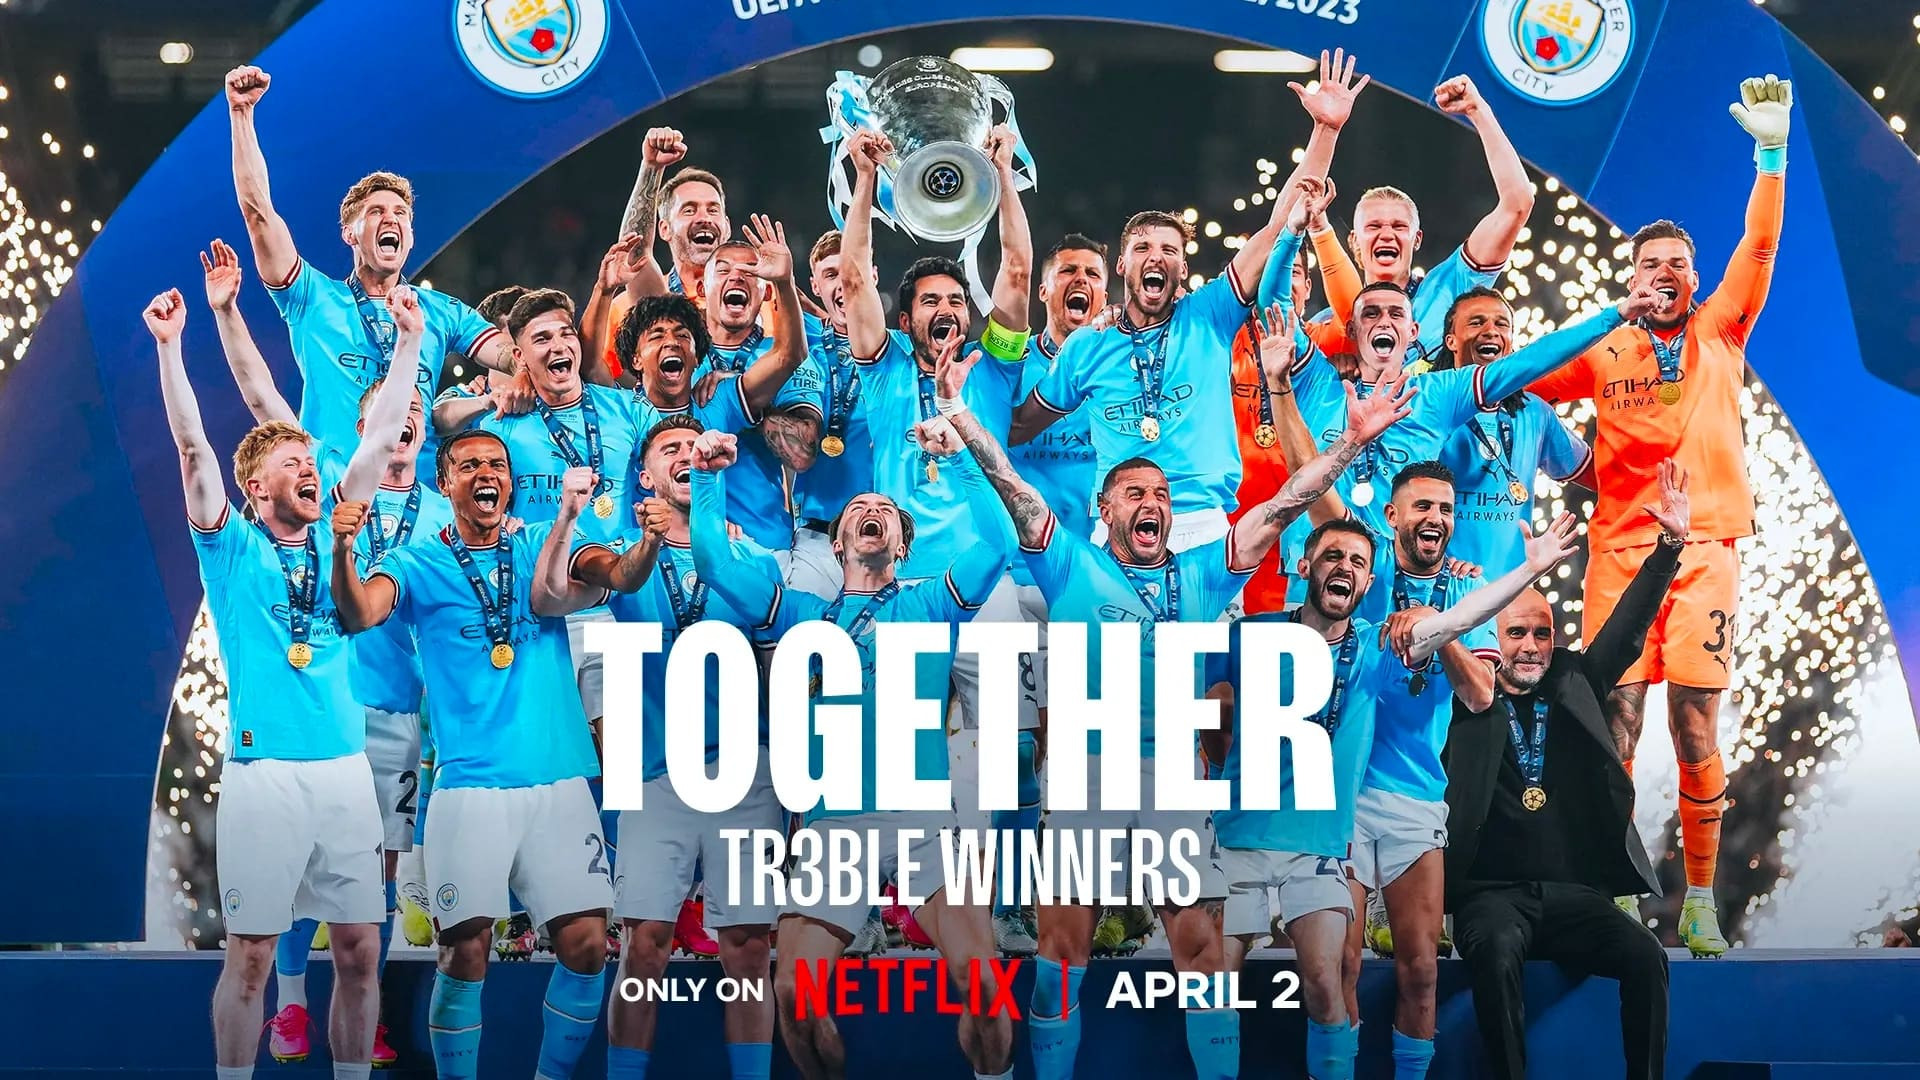 Show Together: Tr3ble Winners